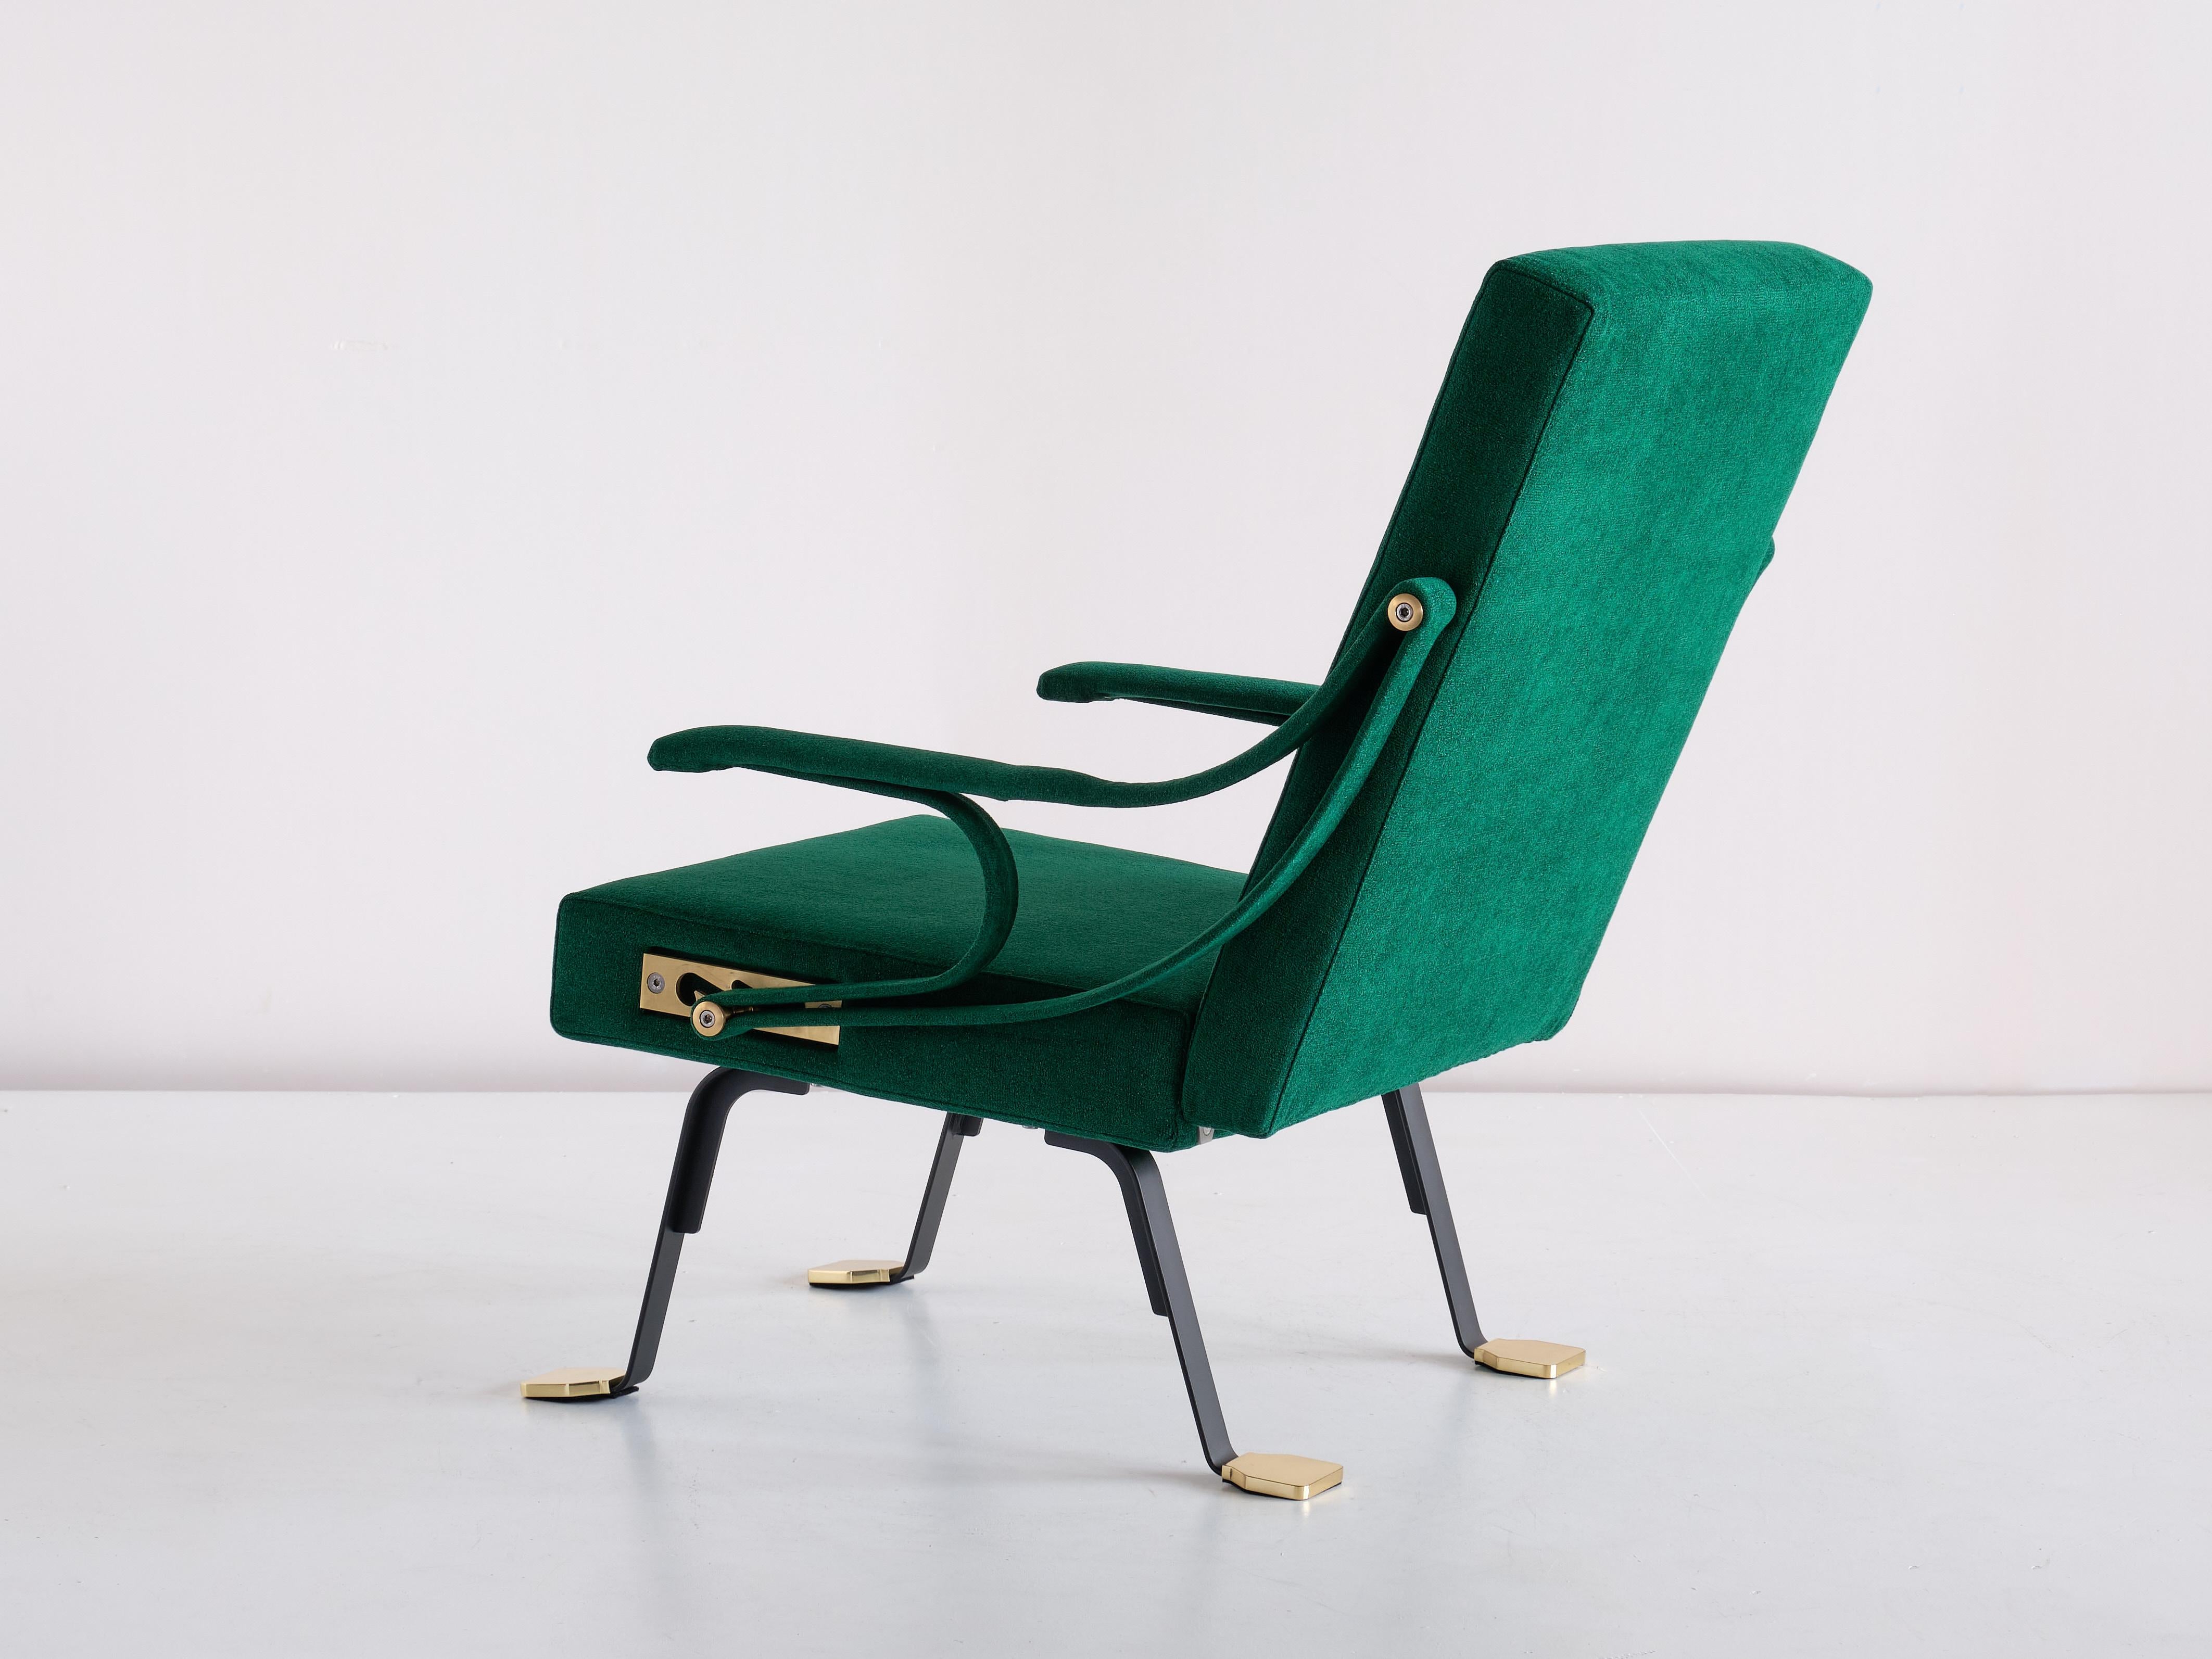 Metal Ignazio Gardella 'Digamma' Armchair in Emerald Green Lelièvre Fabric and Brass For Sale